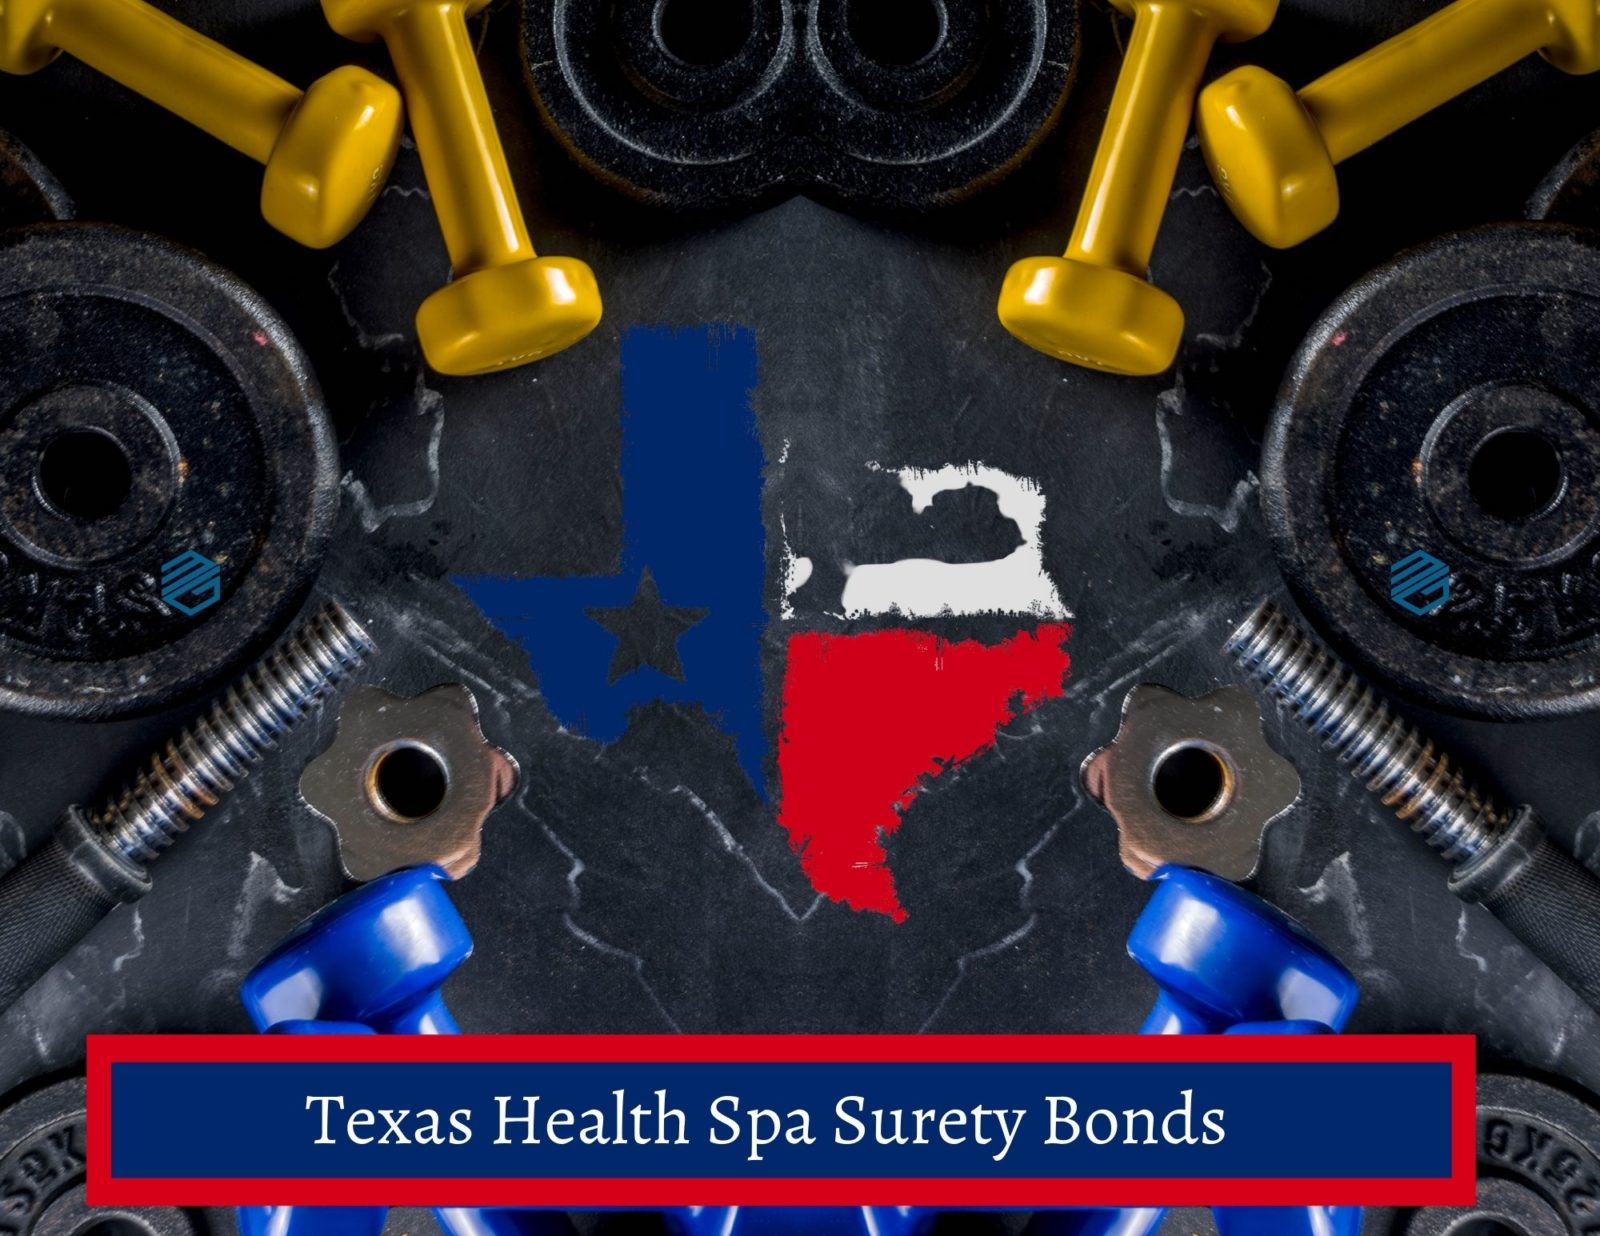 Texas Health Spa Bonds - The shows workout equipment with the state of Texas in the middle. A text box reads, "Texas Health Spa Bonds".